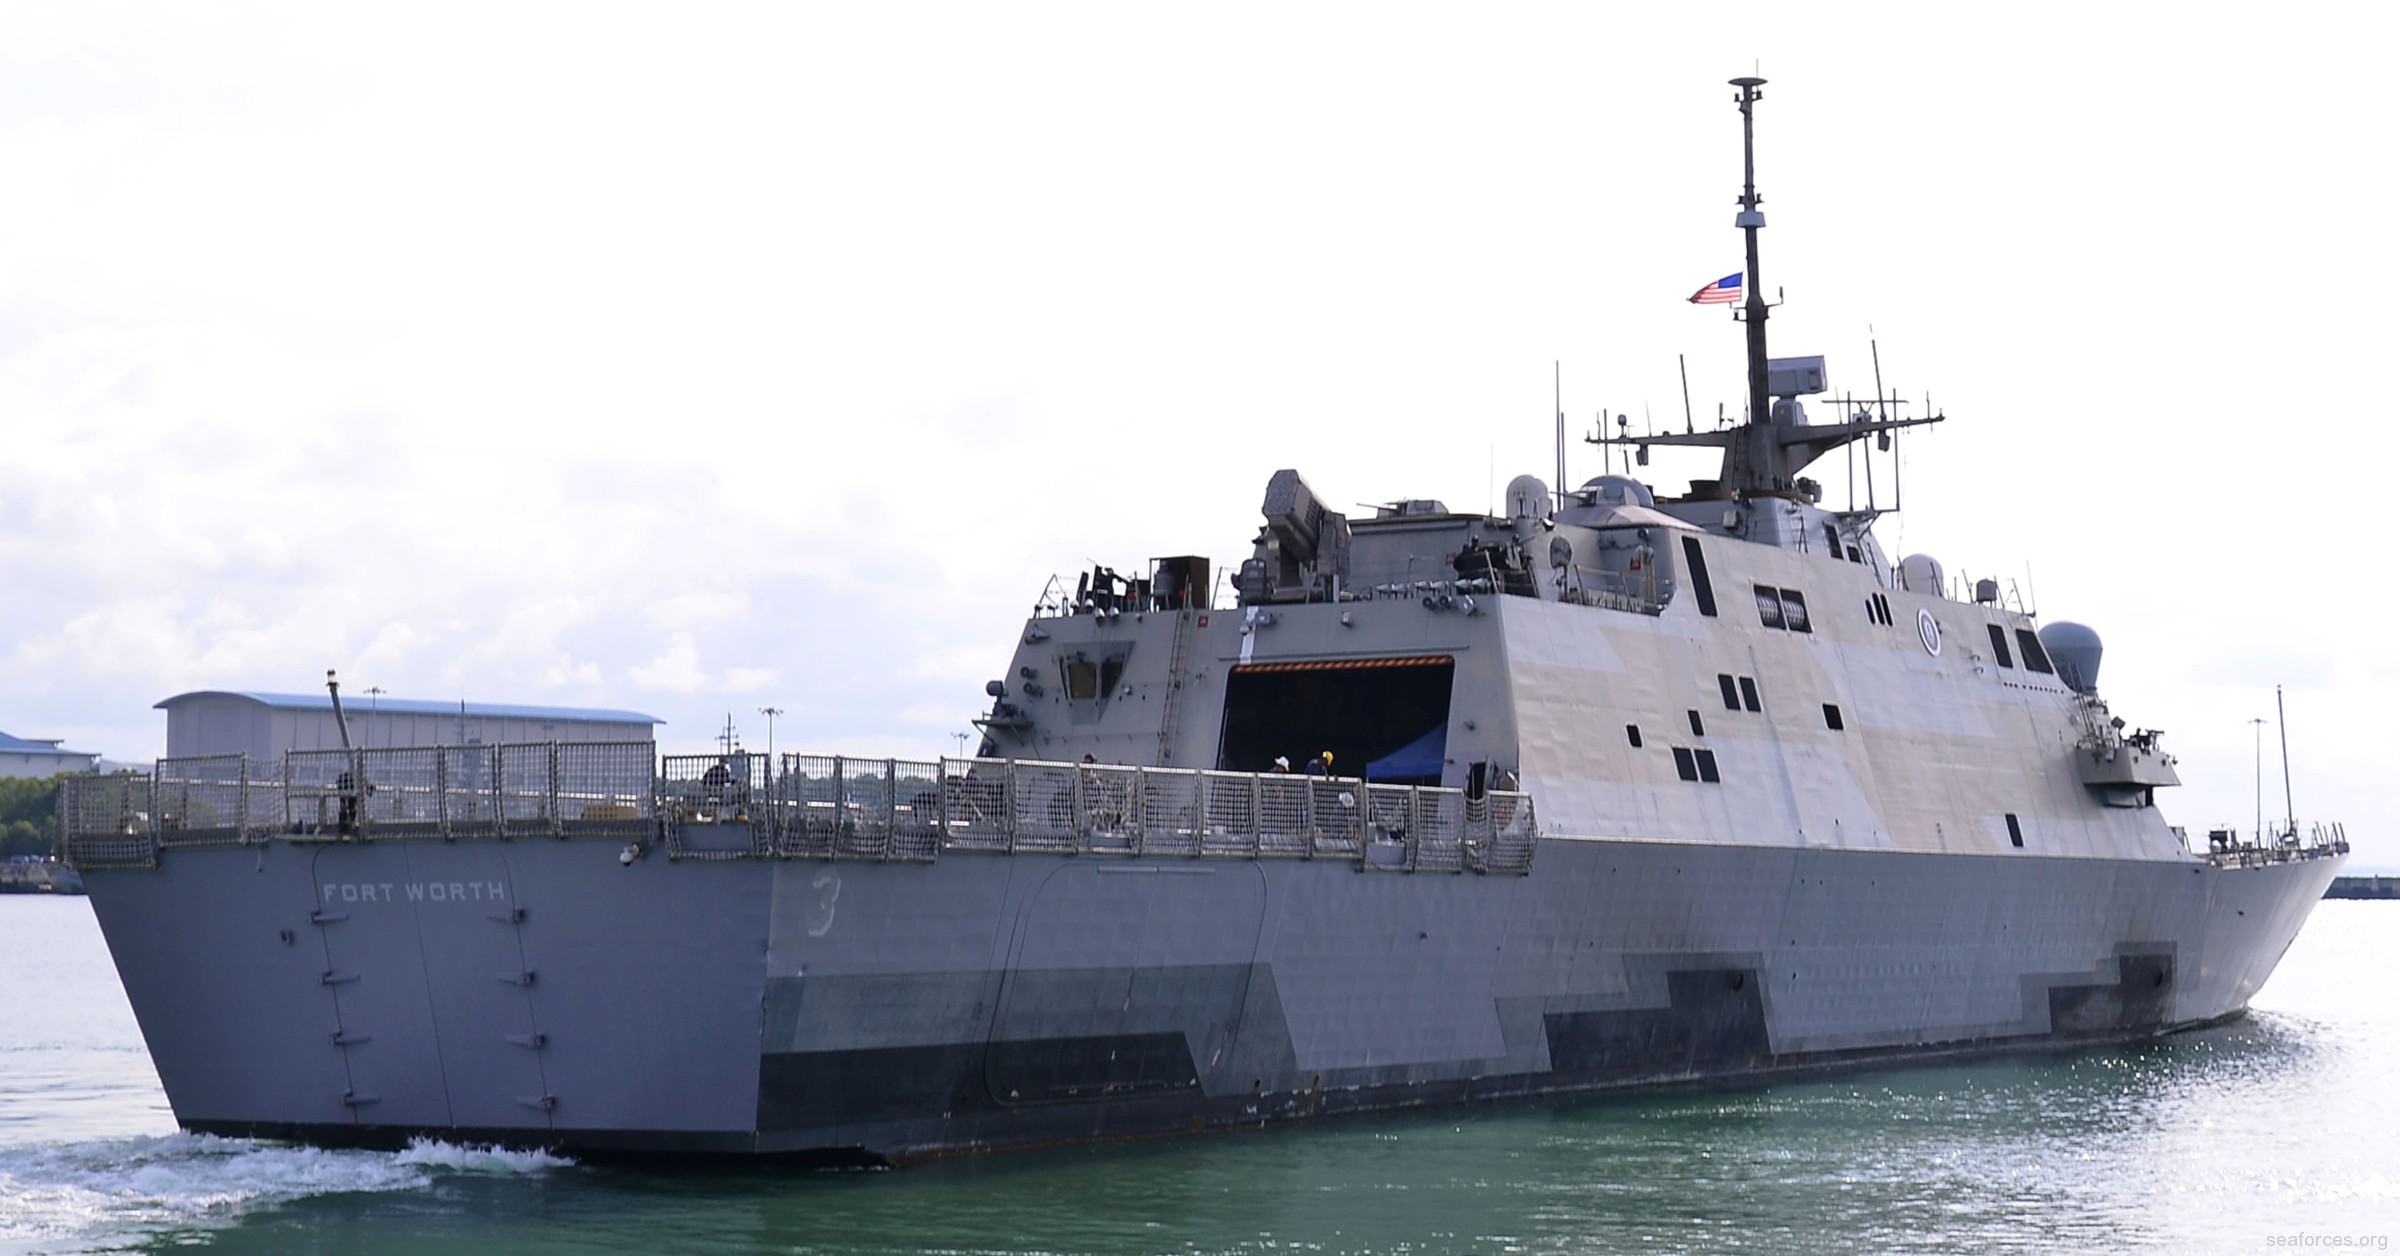 lcs-3 uss fort worth littoral combat ship freedom class us navy 69